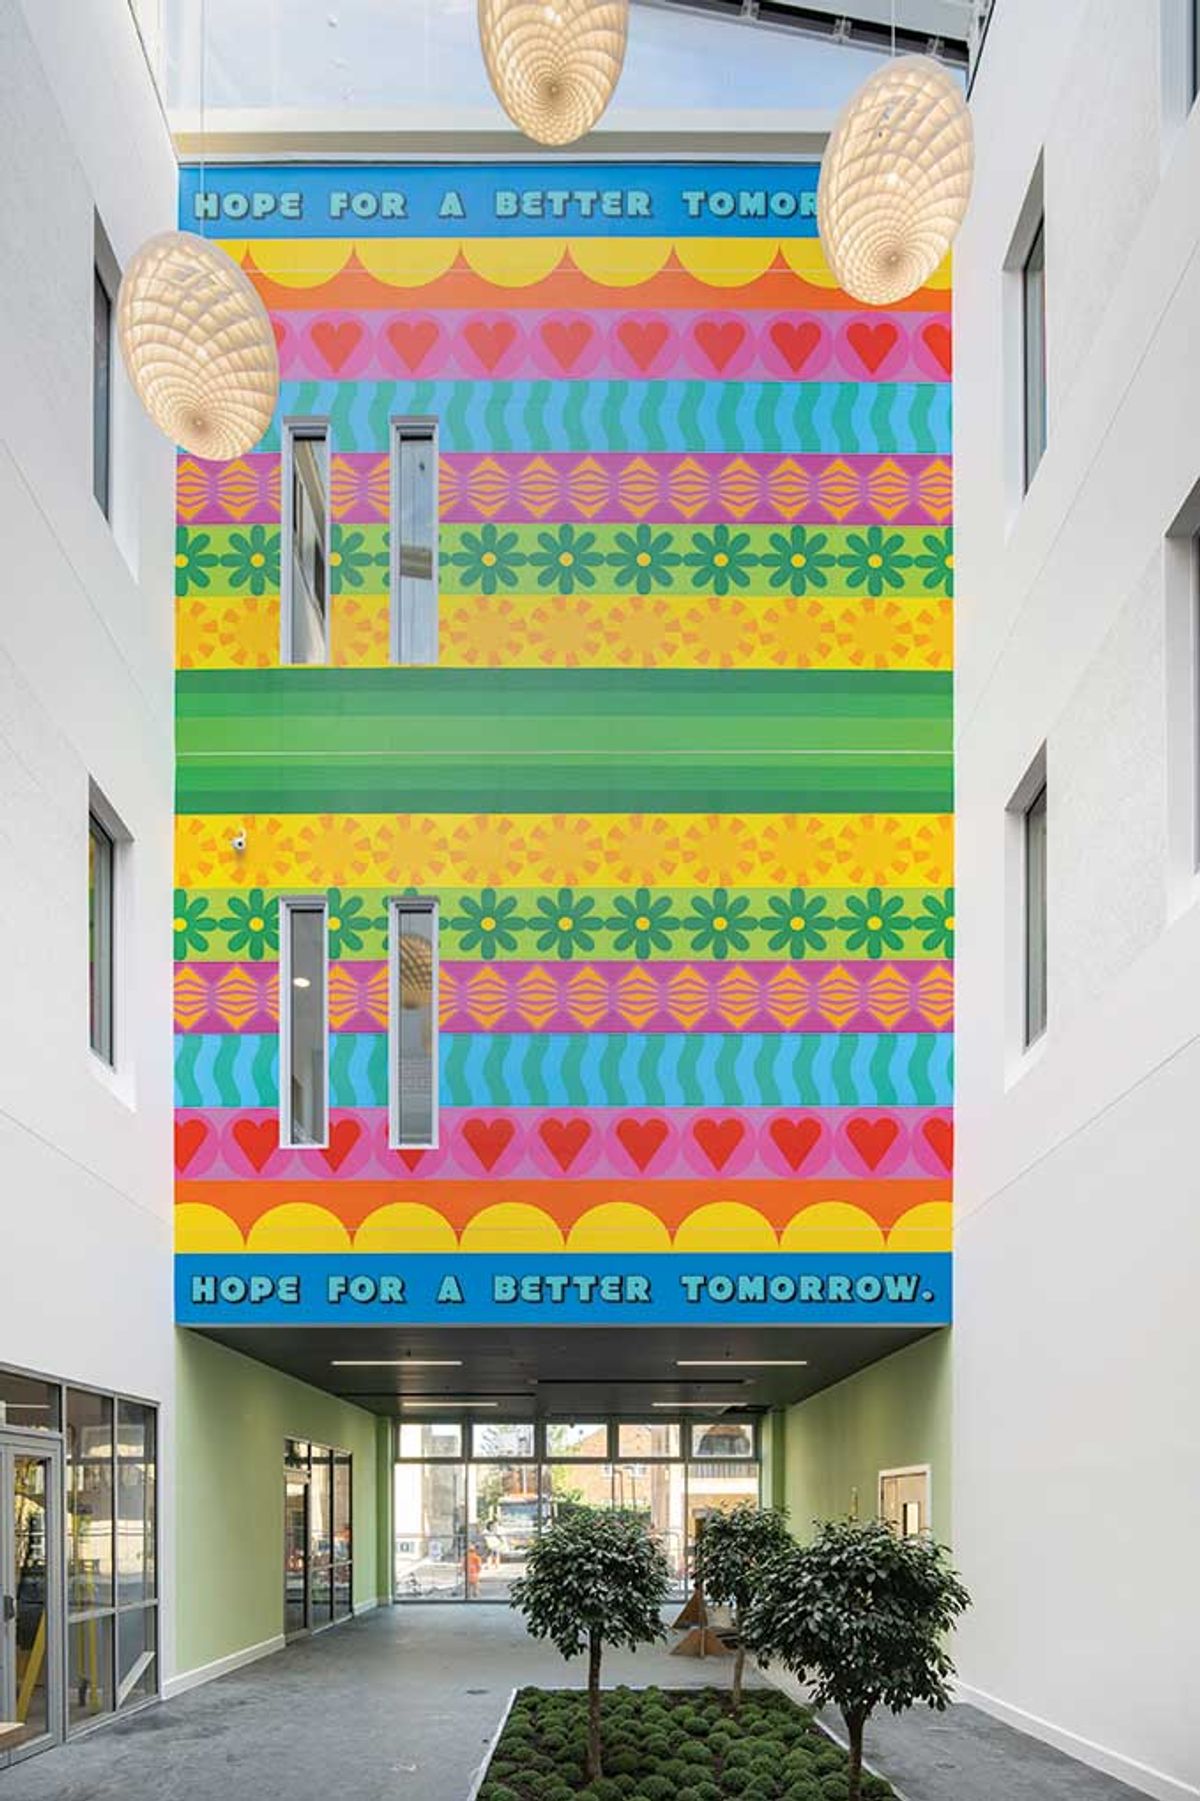 Yinka Ilori’s mural brings colour and cheer to London’s Springfield Hospital

Photo: Damian Griffiths. Courtesy of Hospital Rooms



